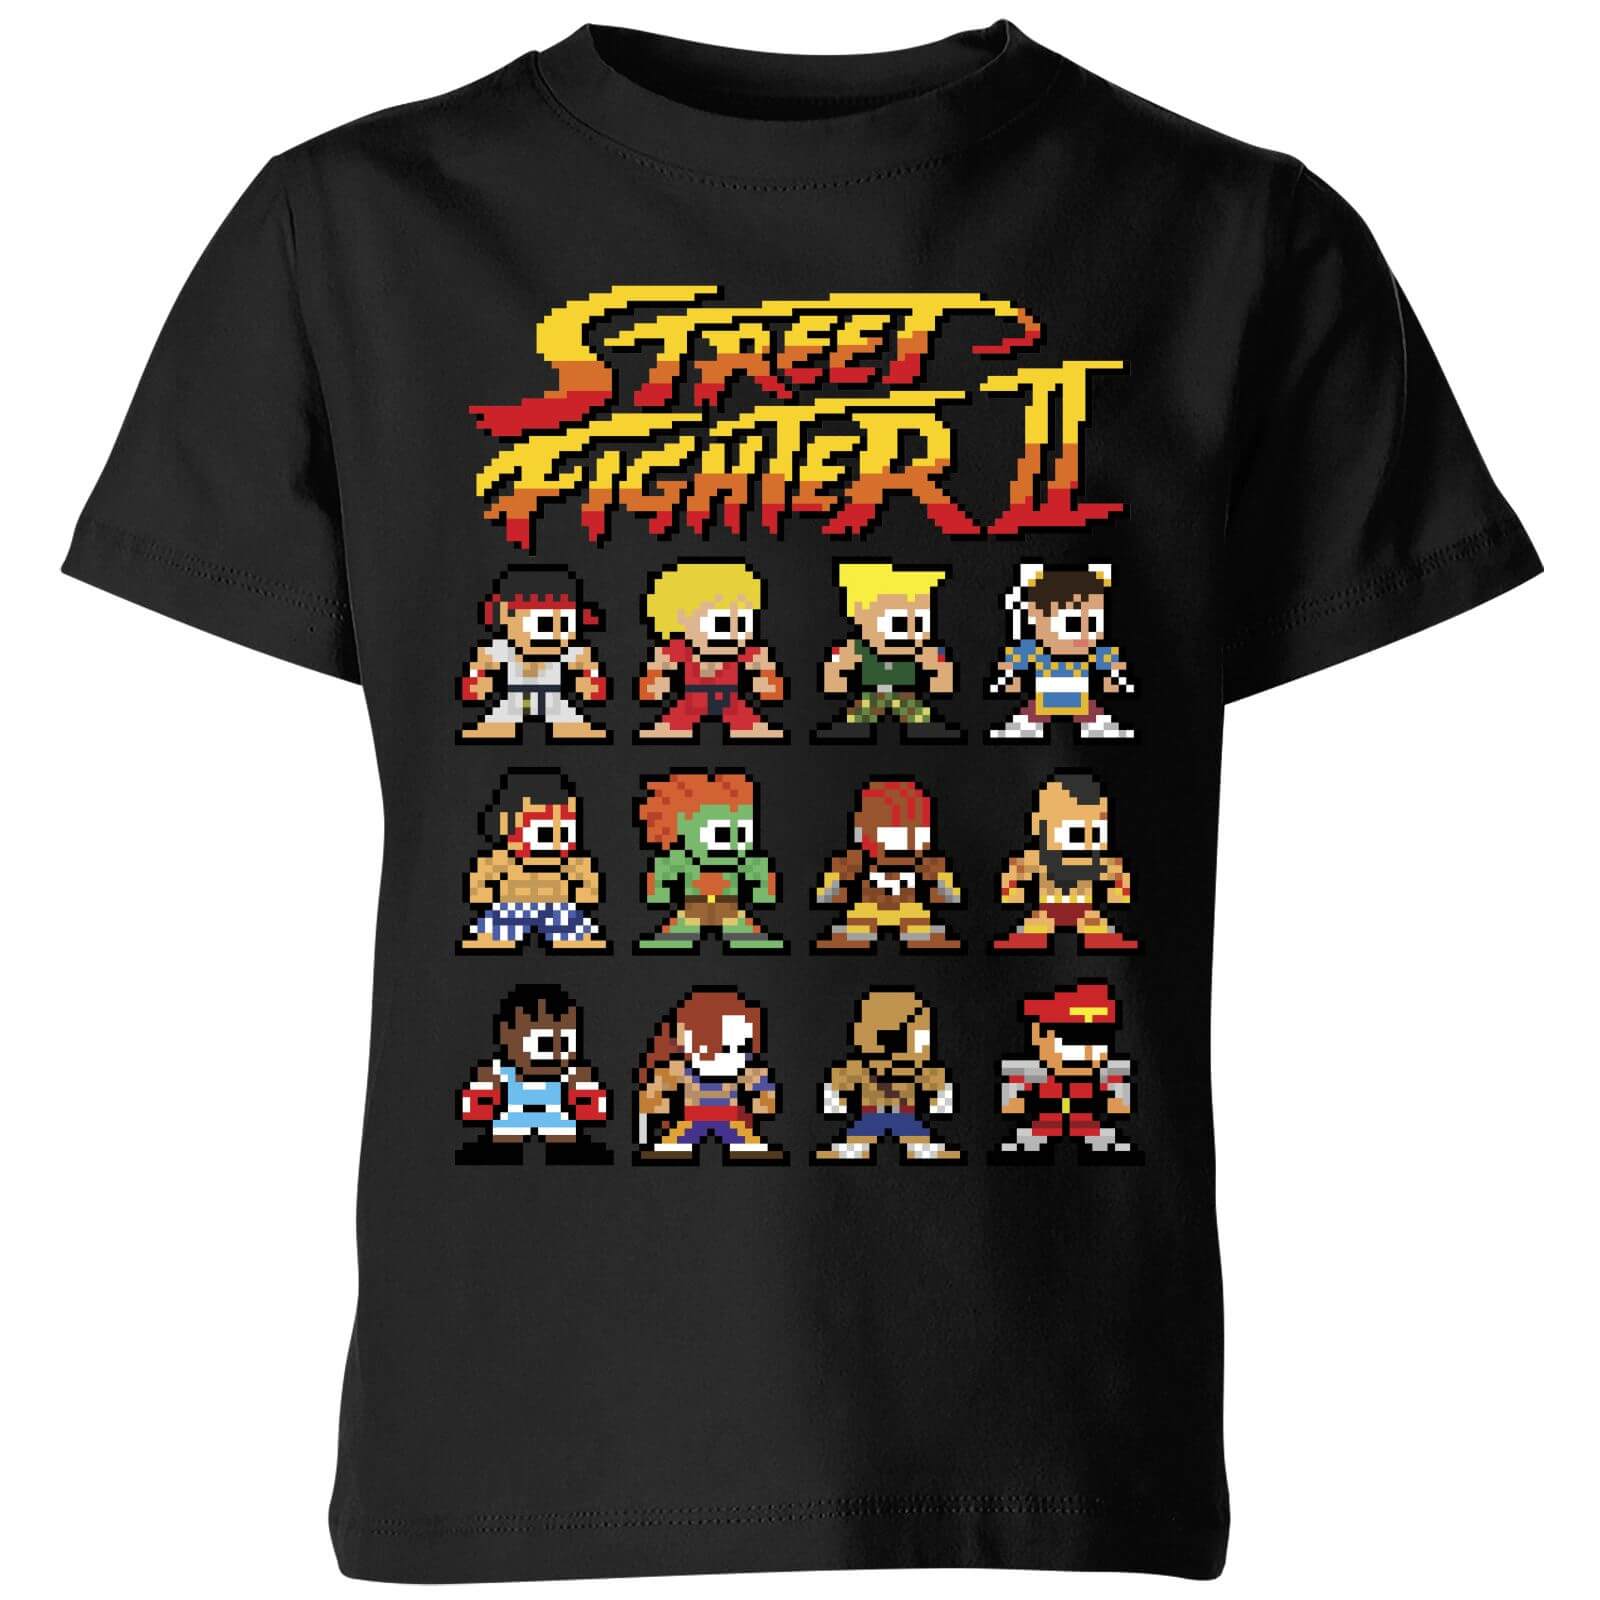 Street Fighter 2 Pixel Characters Kids' T-Shirt - Black - 5-6 Years